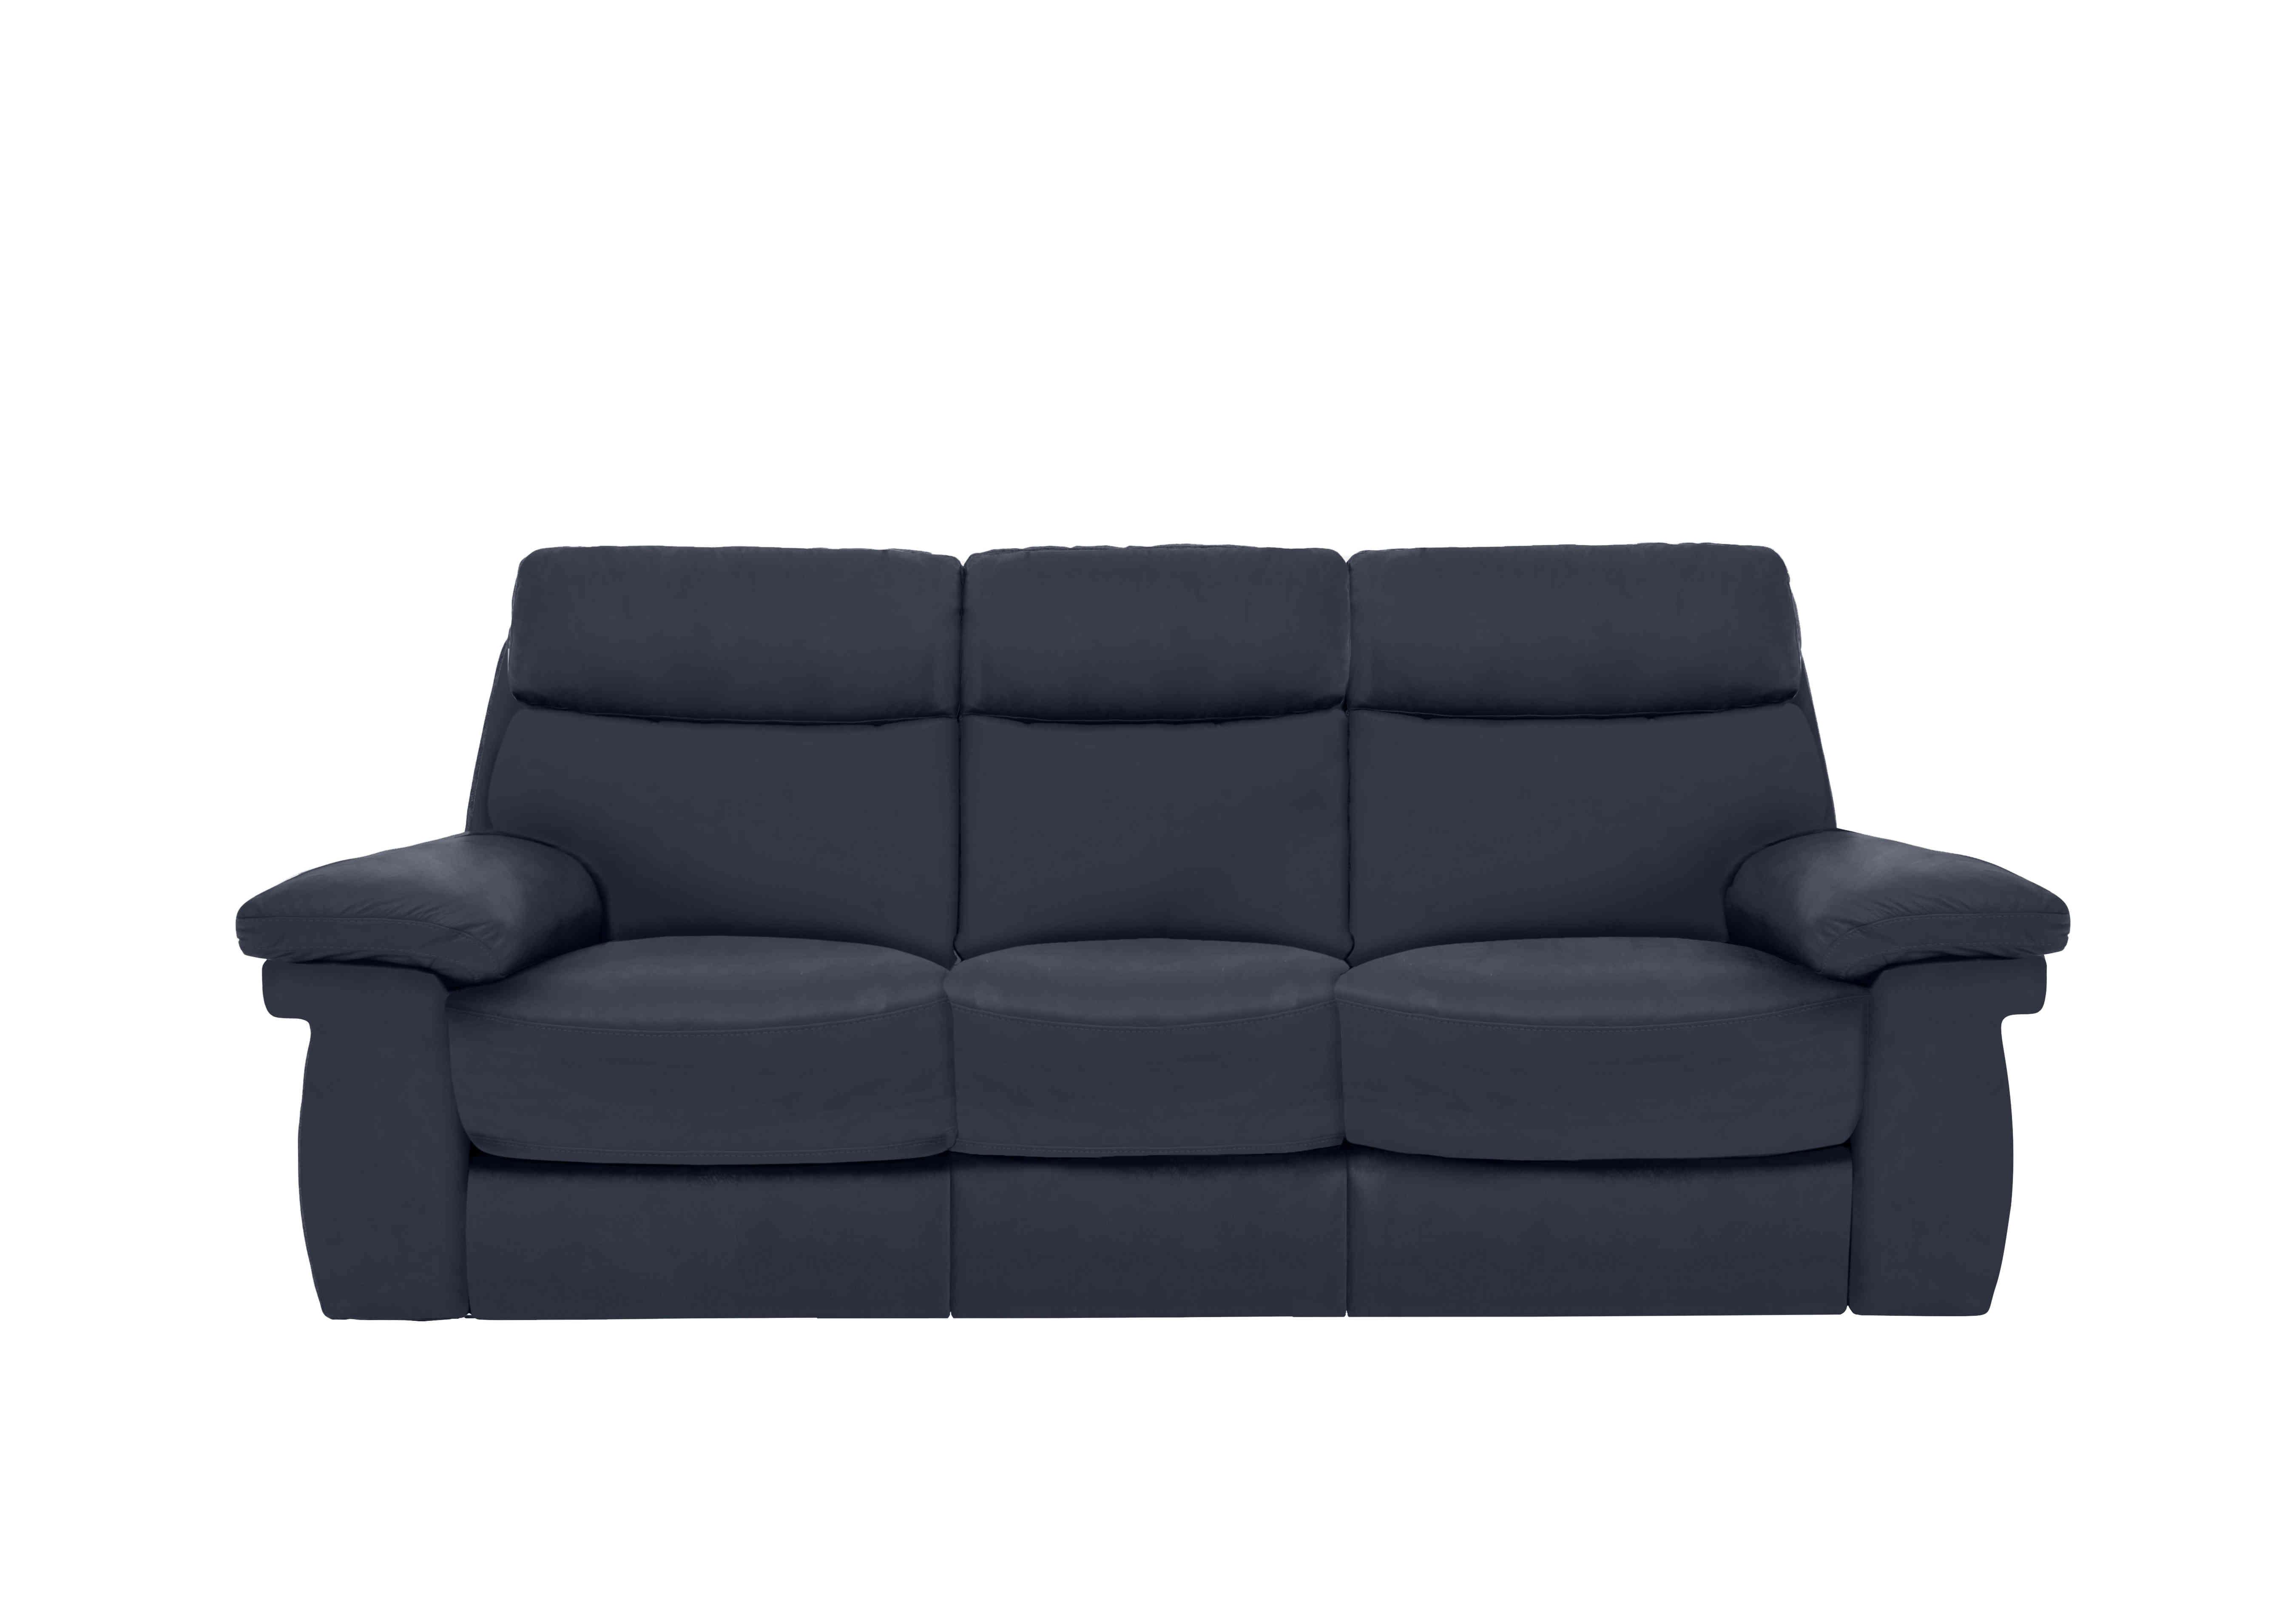 Serene 3 Seater Leather Power Recliner Sofa with Drop Down Table in Bx-036c Navy on Furniture Village